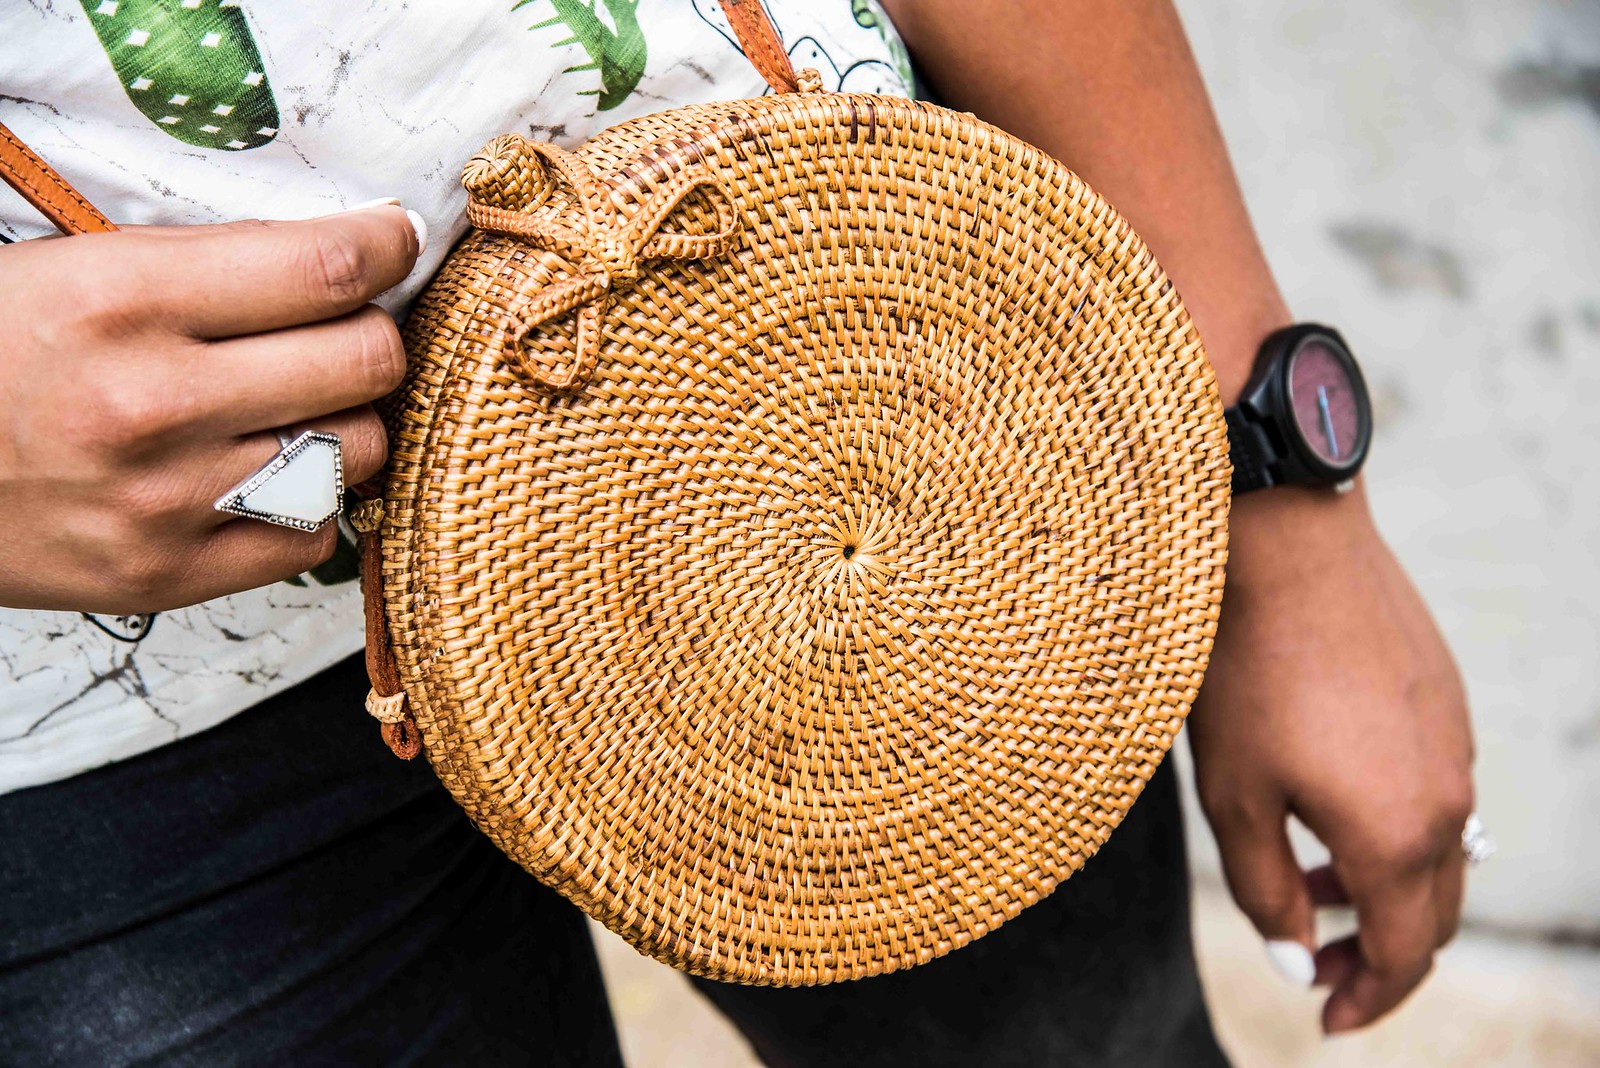 how to rock the straw bag trend, round rattan bag